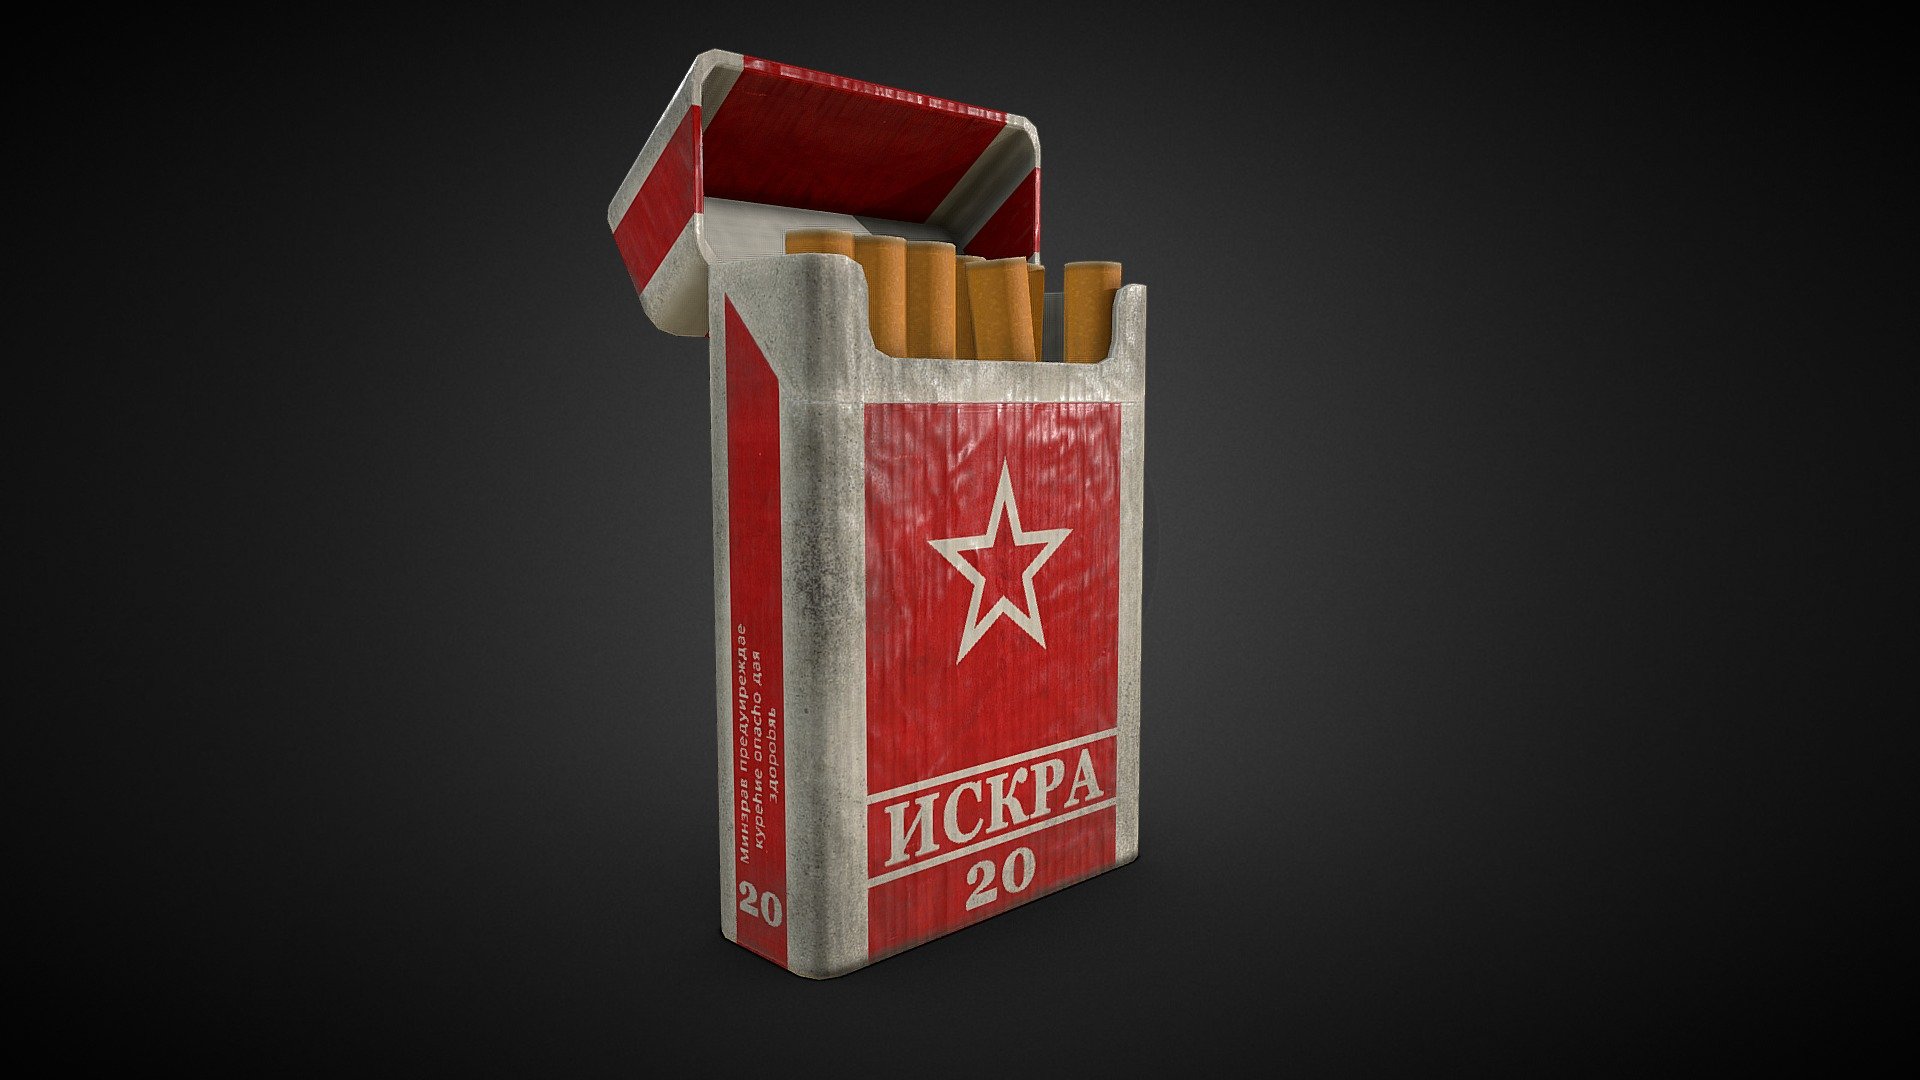 Game asset for a game I’m working on. Modelled in Blender and textured using Quixel 2.0 - Old pack of cigarettes - 3D model by Cristian Iordache (@christian-mg) 3d model